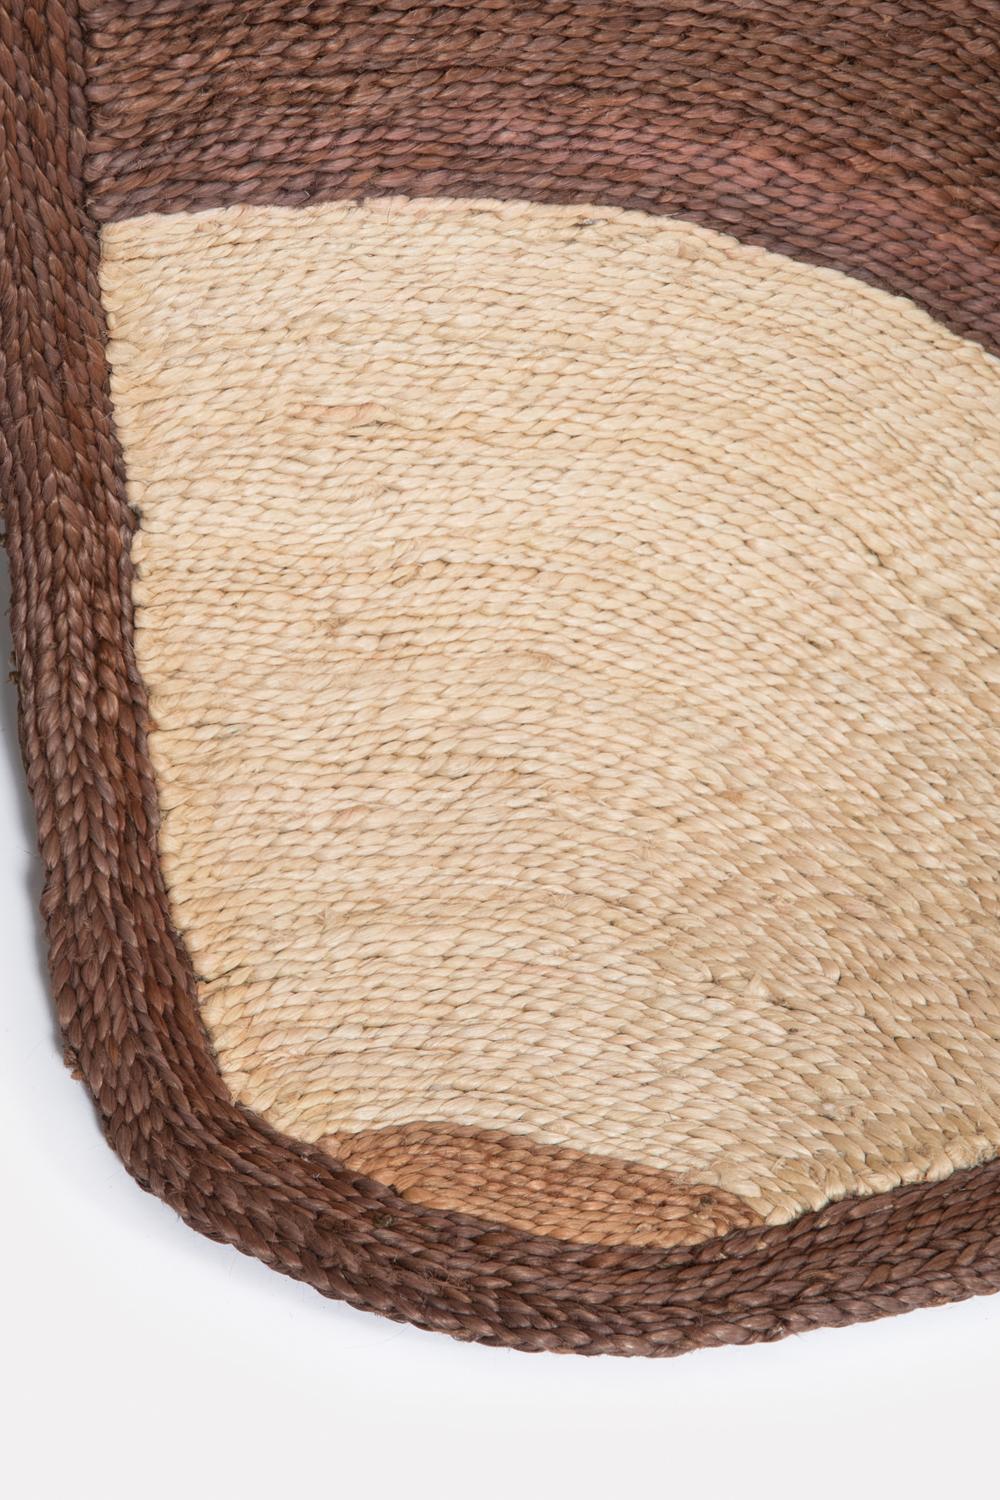 Modern Handbraided Jute Rug Black Blue Chocolate Natural Ivory Simba In New Condition For Sale In Madrid, ES